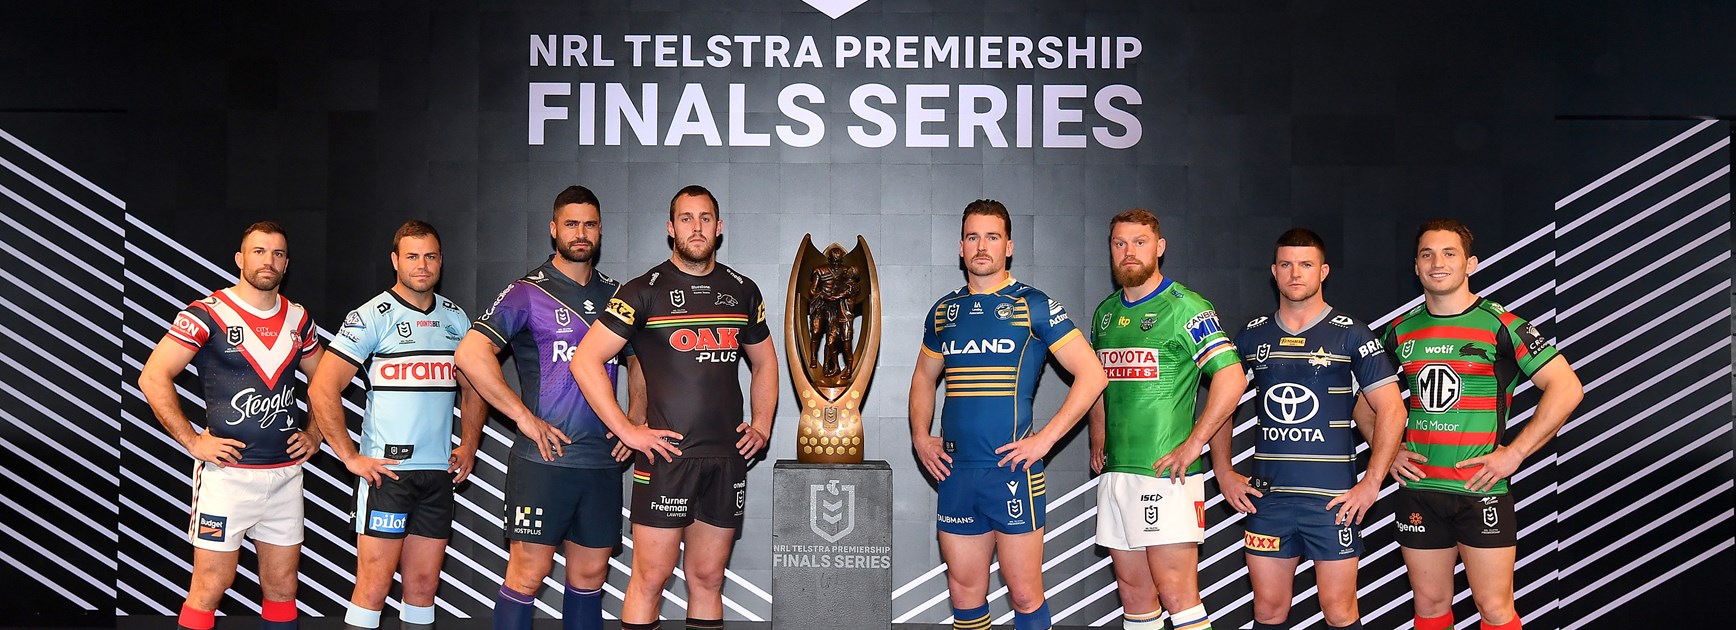 22 burning questions for the 2022 Finals series